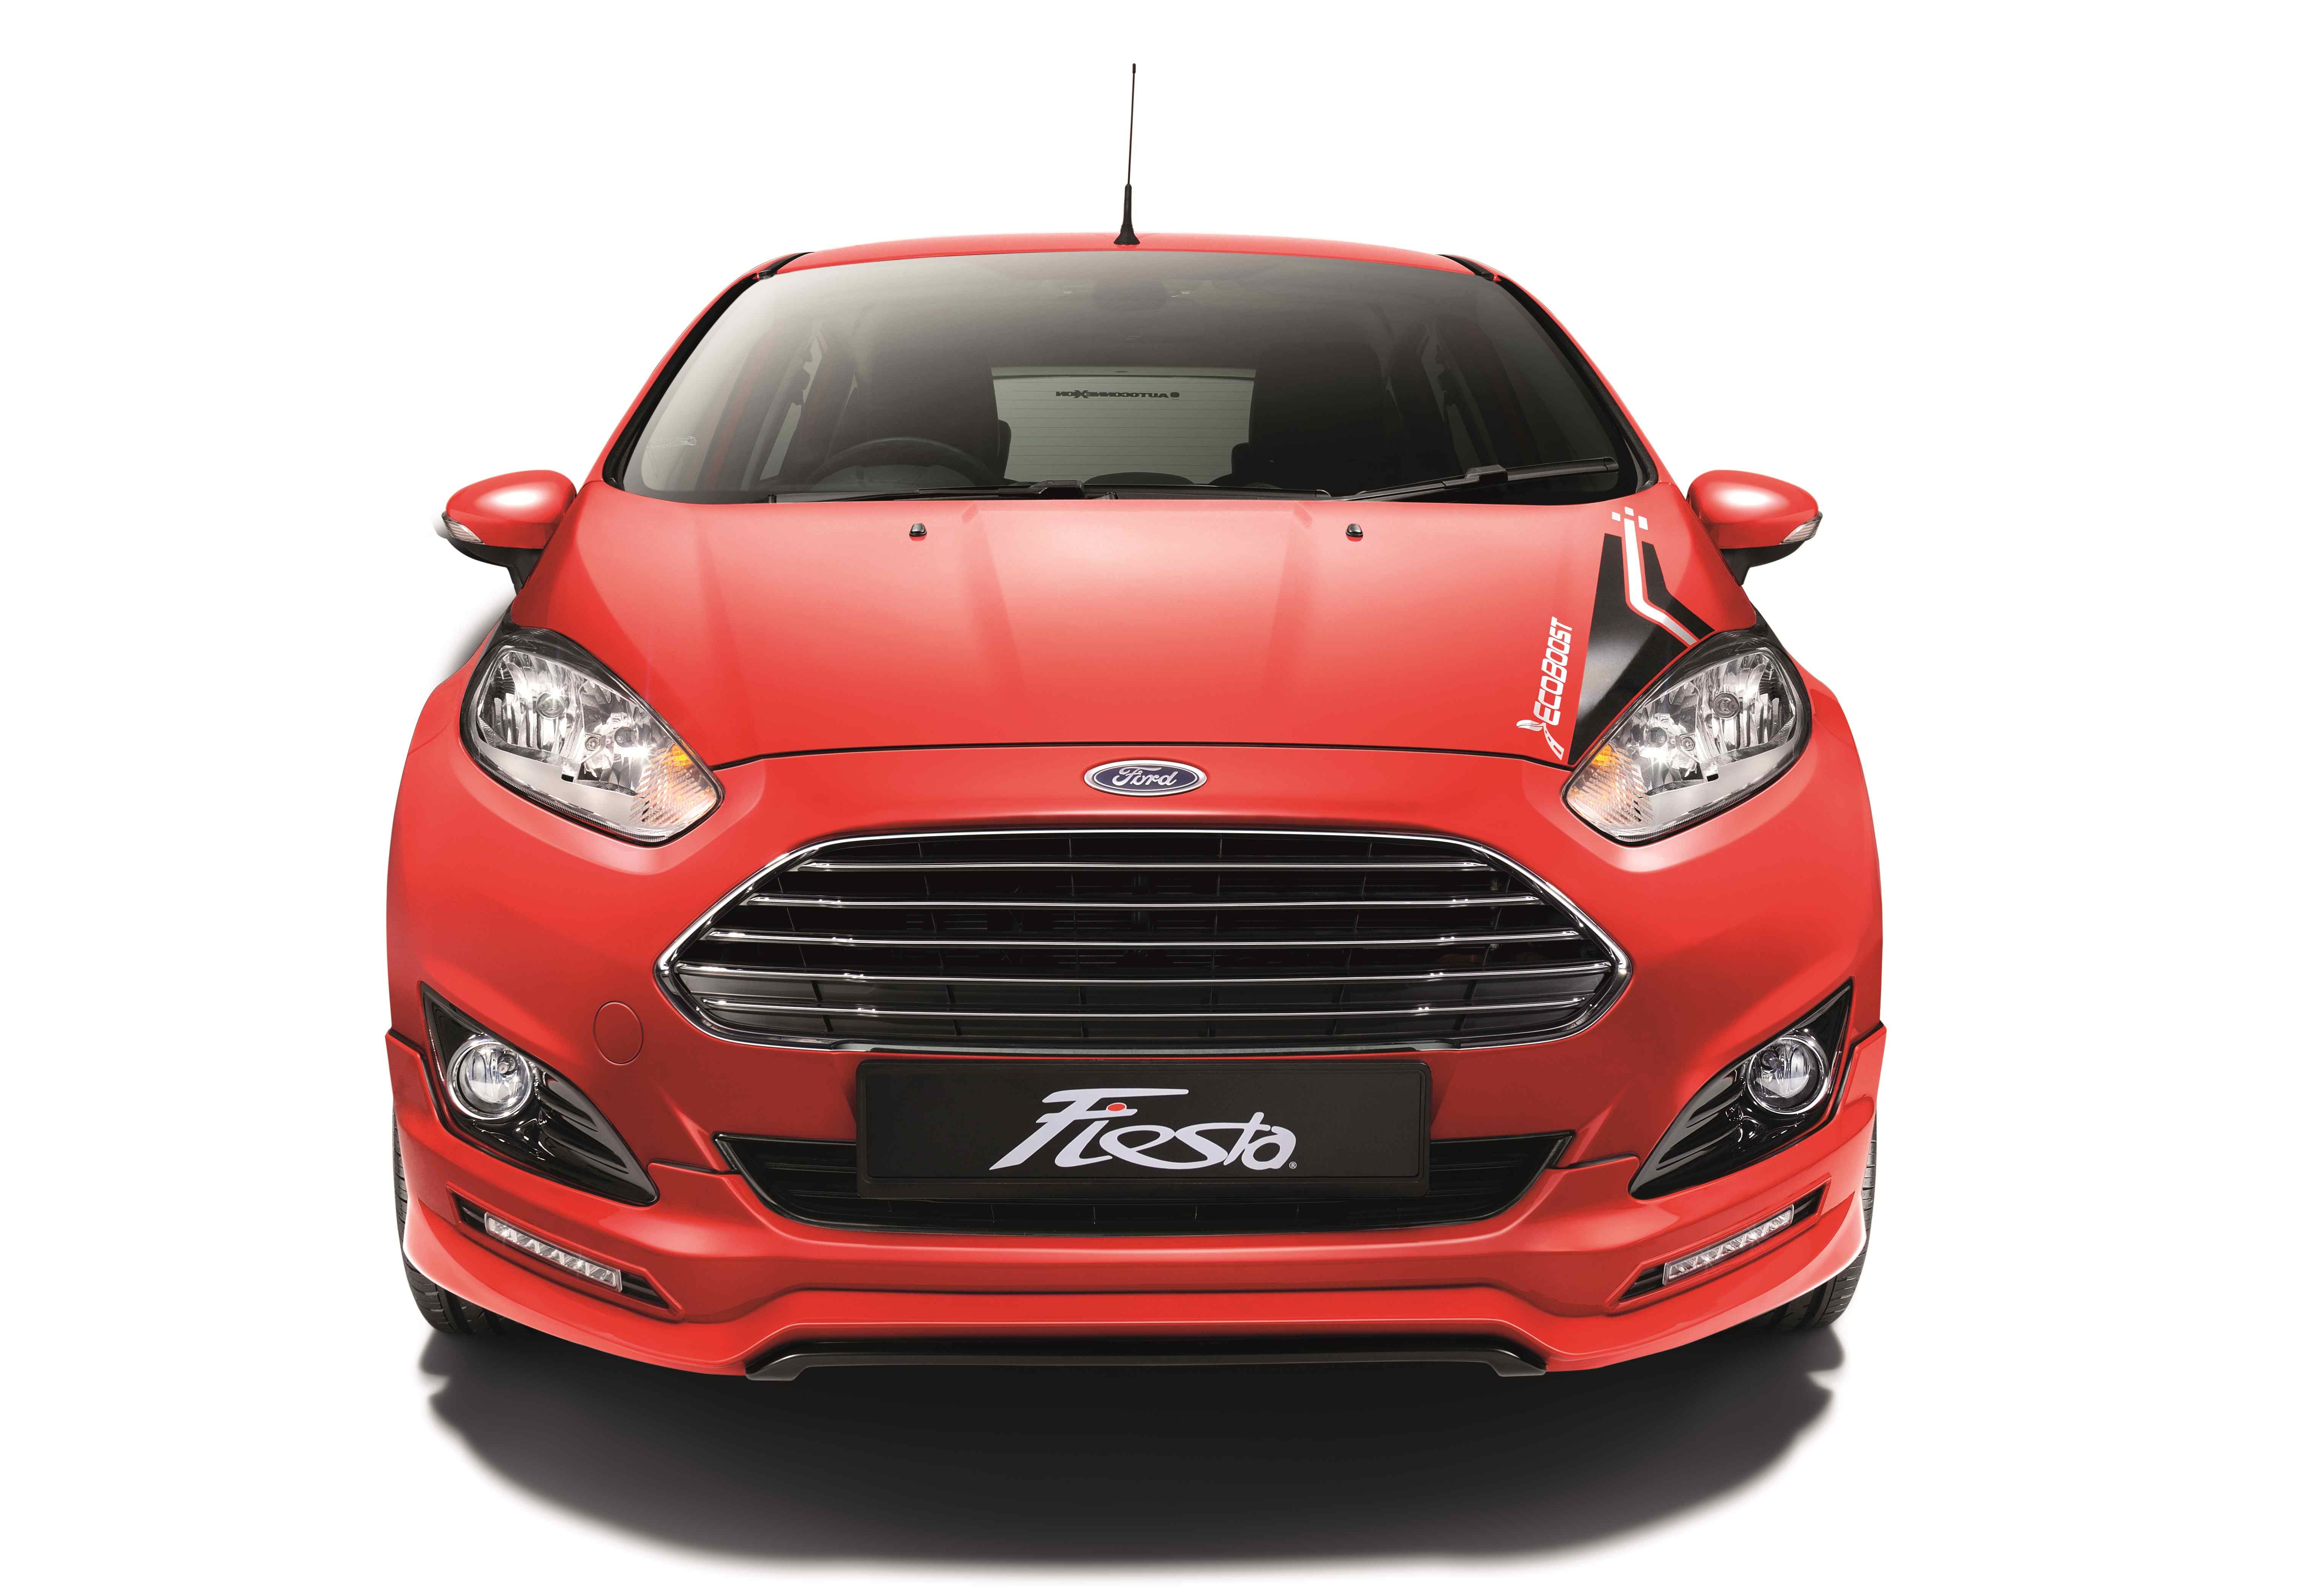 Ford Fiesta 1.0 EcoBoost launched in Malaysia - RM93,888